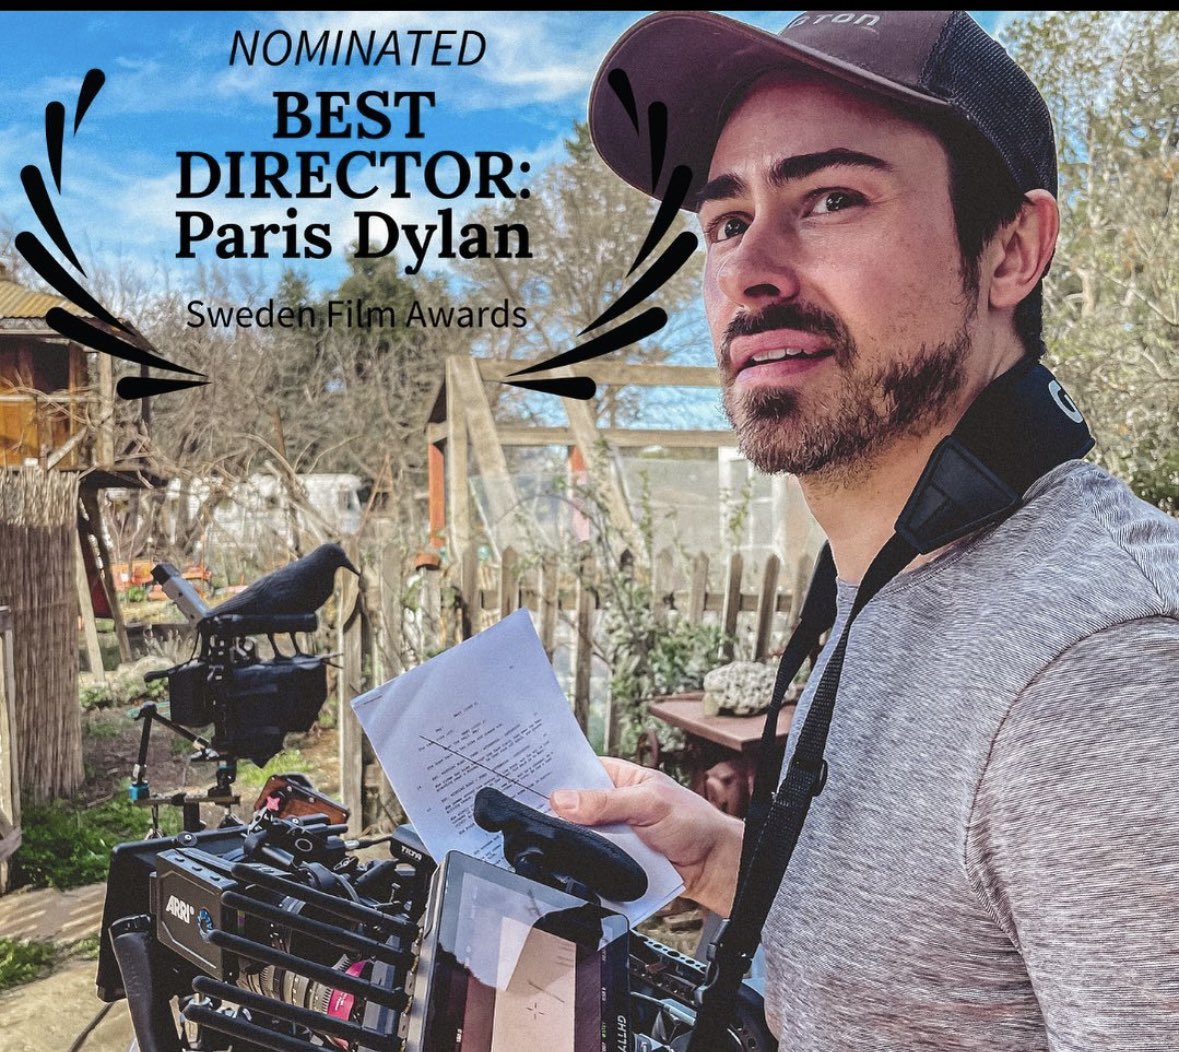 Congrats to @mrParisDylan for being nominated for #bestdirector by the #swedenfilmawards! #filmfestival #thrillerfilm #indieproducer #filmproducers #moviemagi